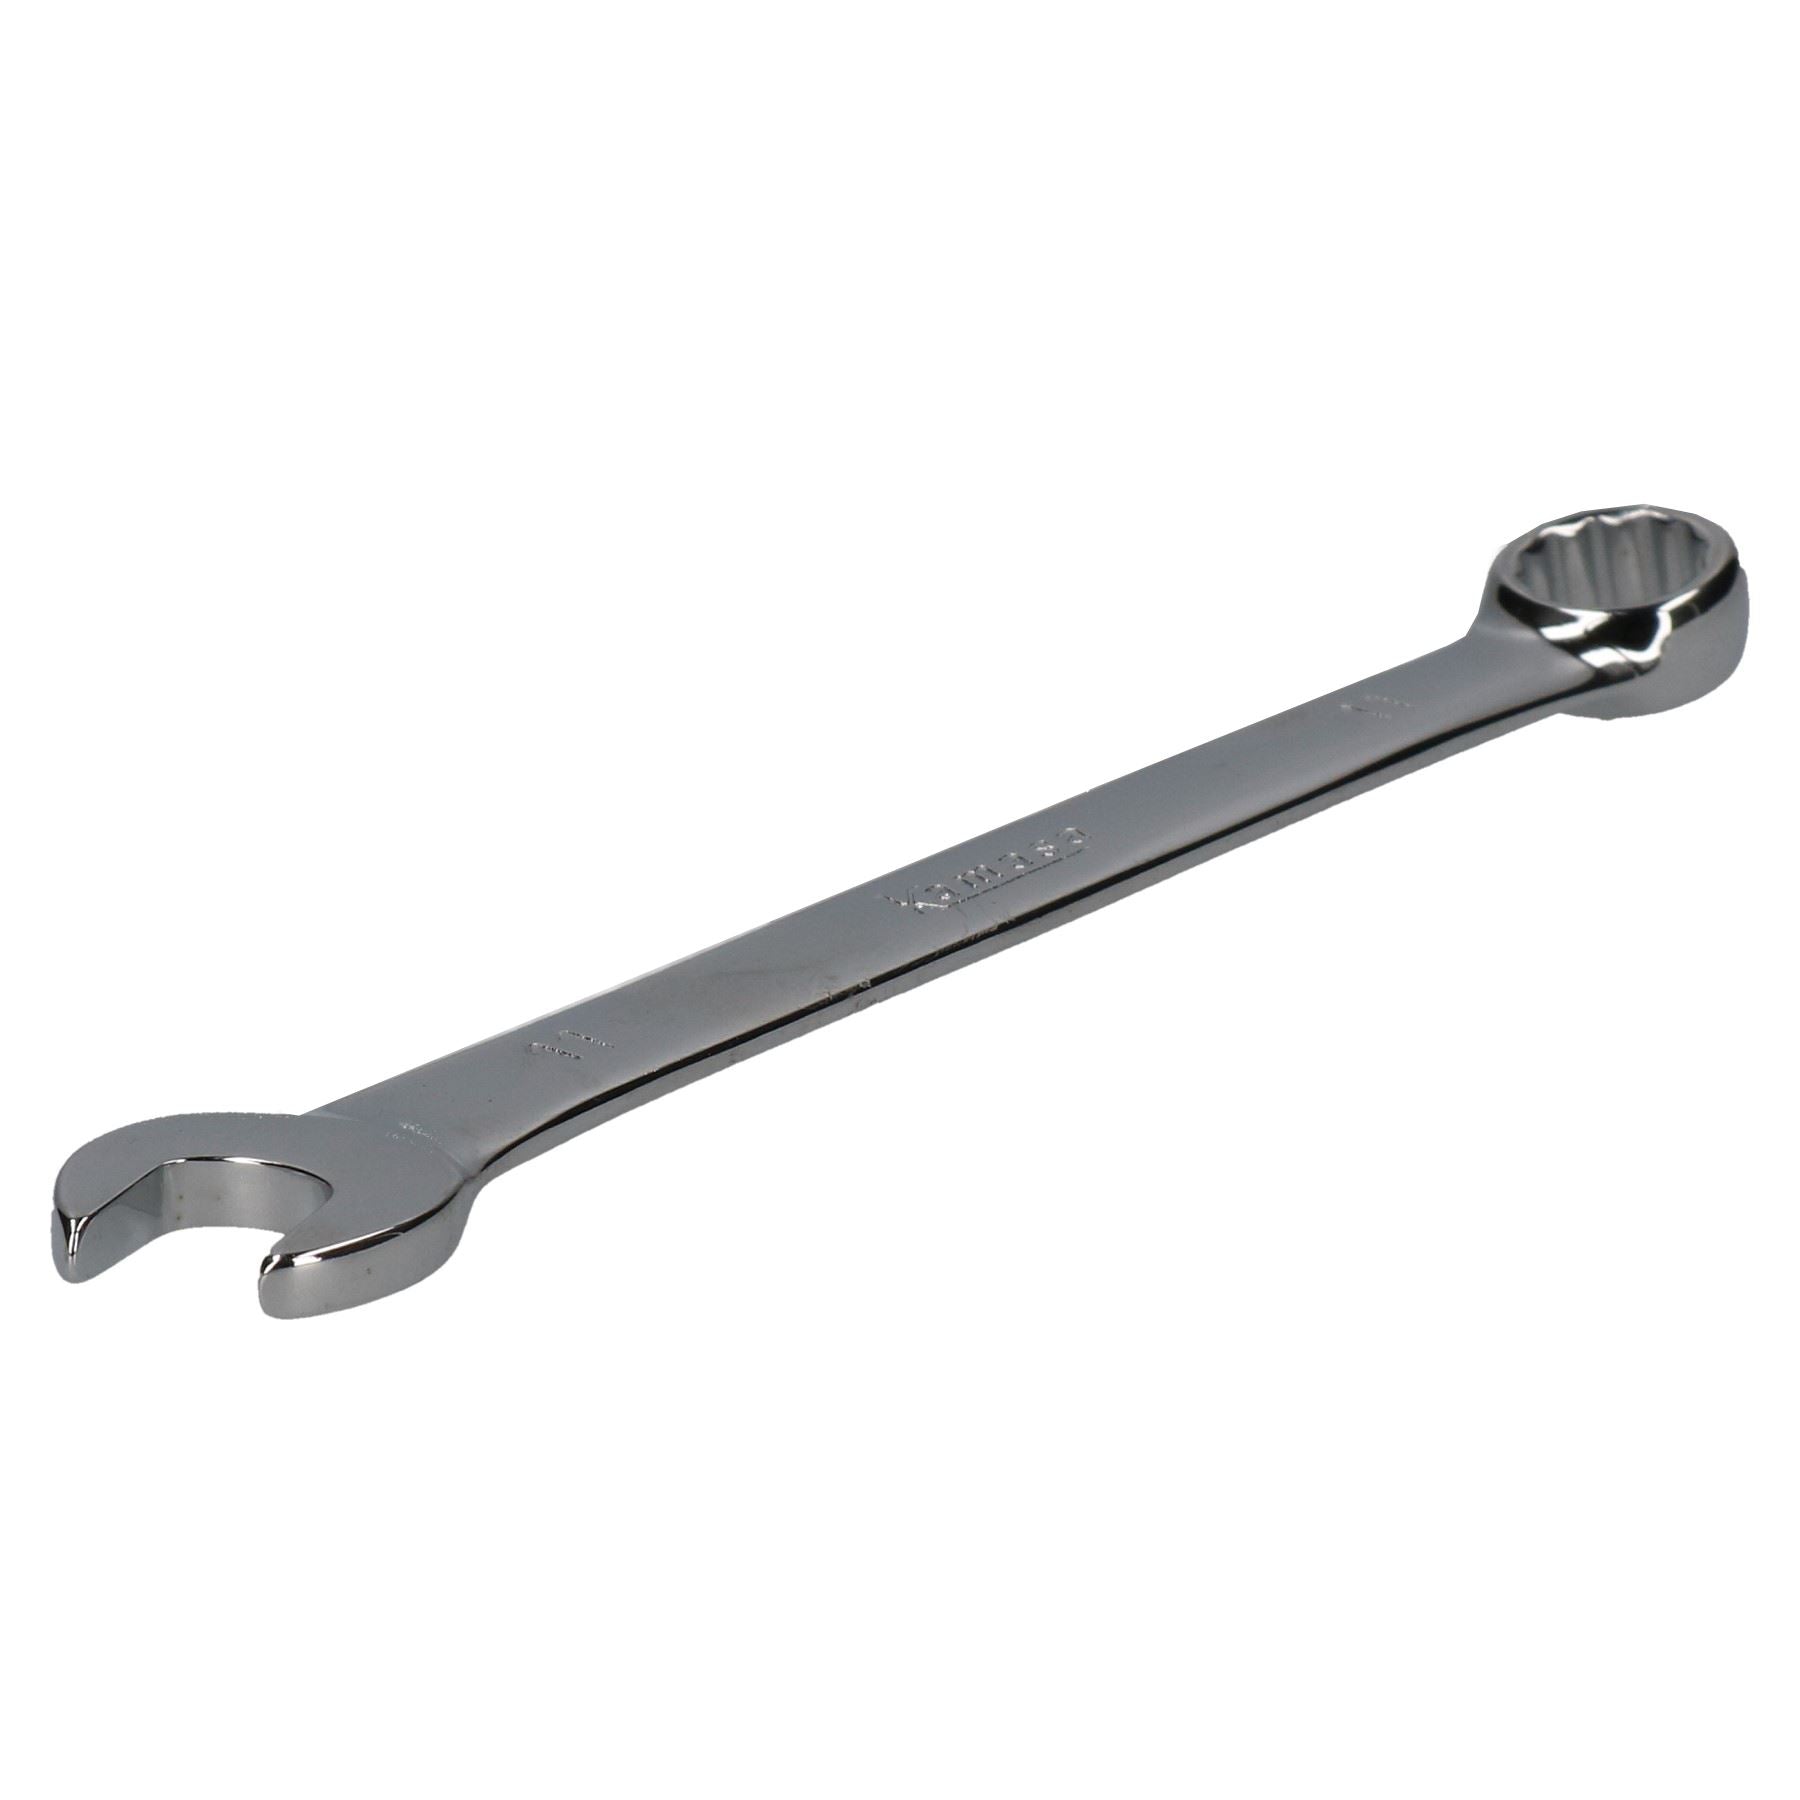 Metric MM Combination Spanner Wrench Ring Open Ended 6mm – 22mm